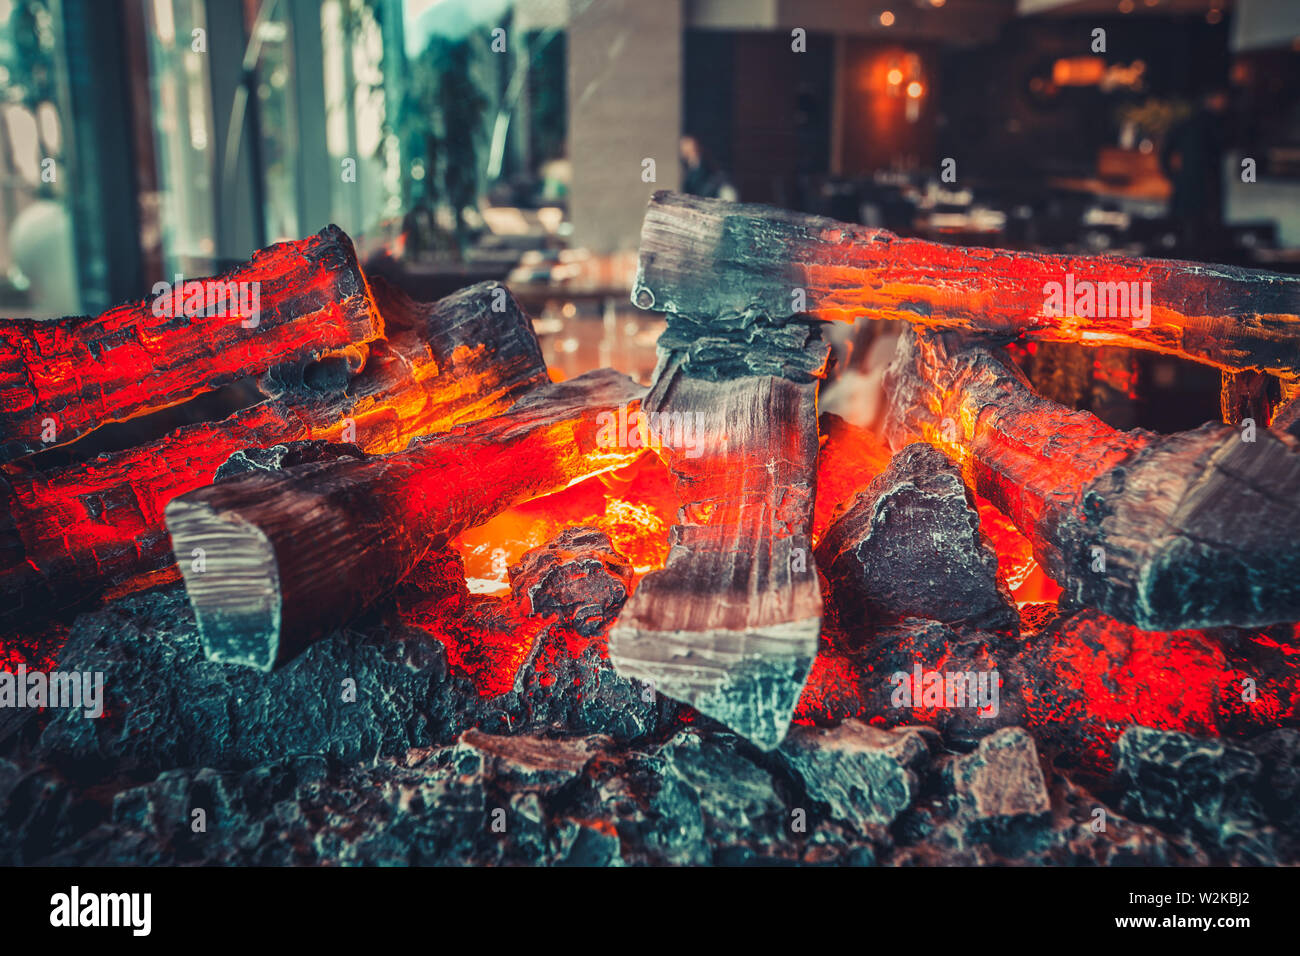 Interior of modern restaurant with fireplace close-up Stock Photo